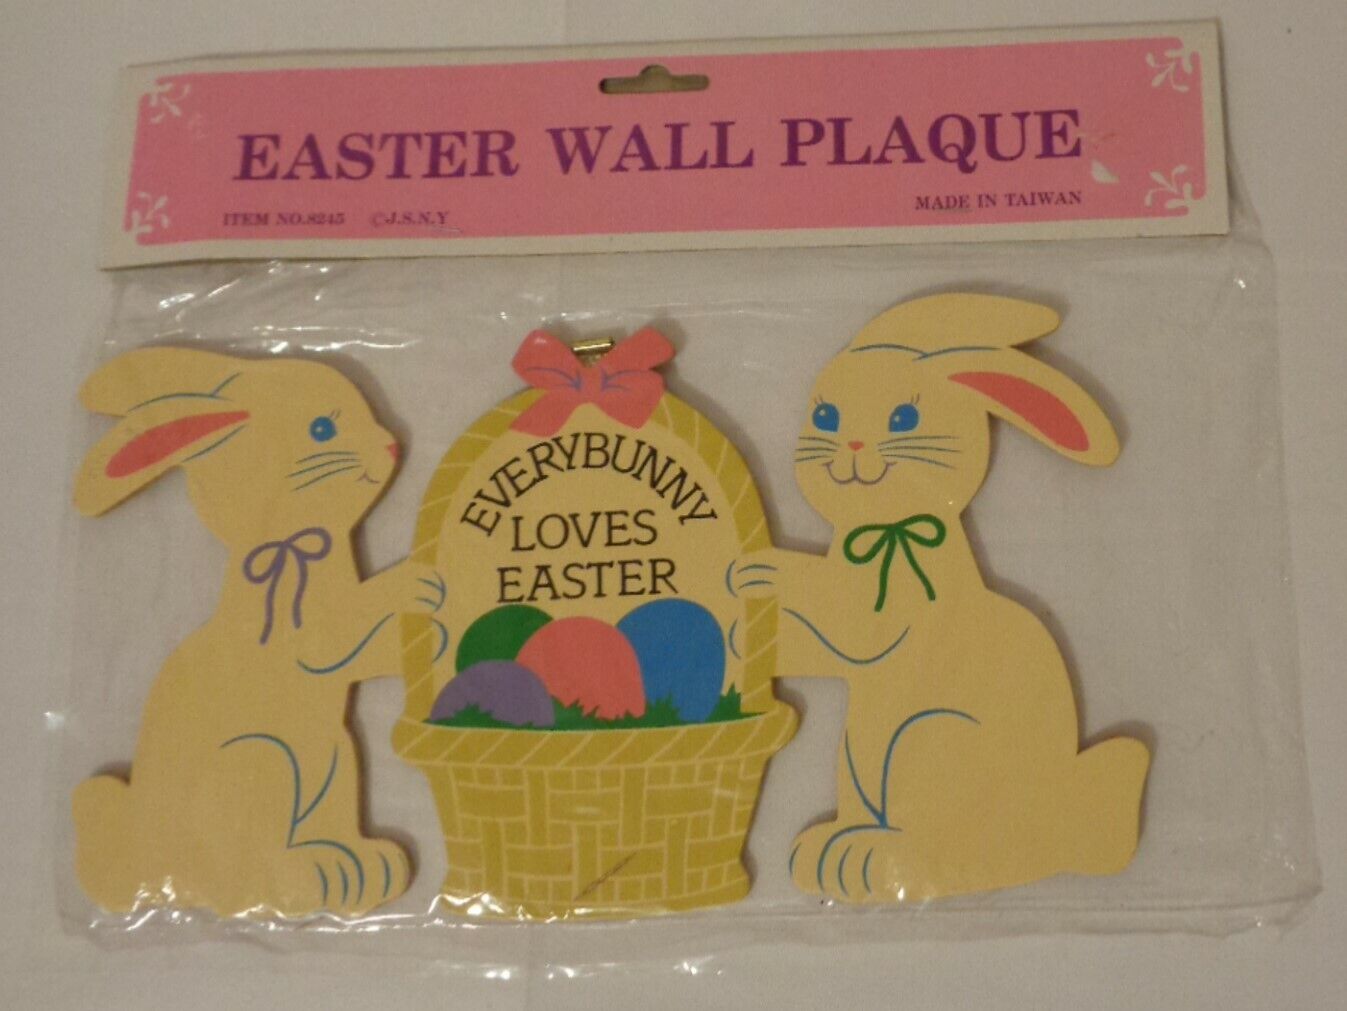 VINTAGE EASTER WALL PLAQUE WOODEN EVERYBUNNY LOVES NIP JSNY BUNNY RABBIT BASKET